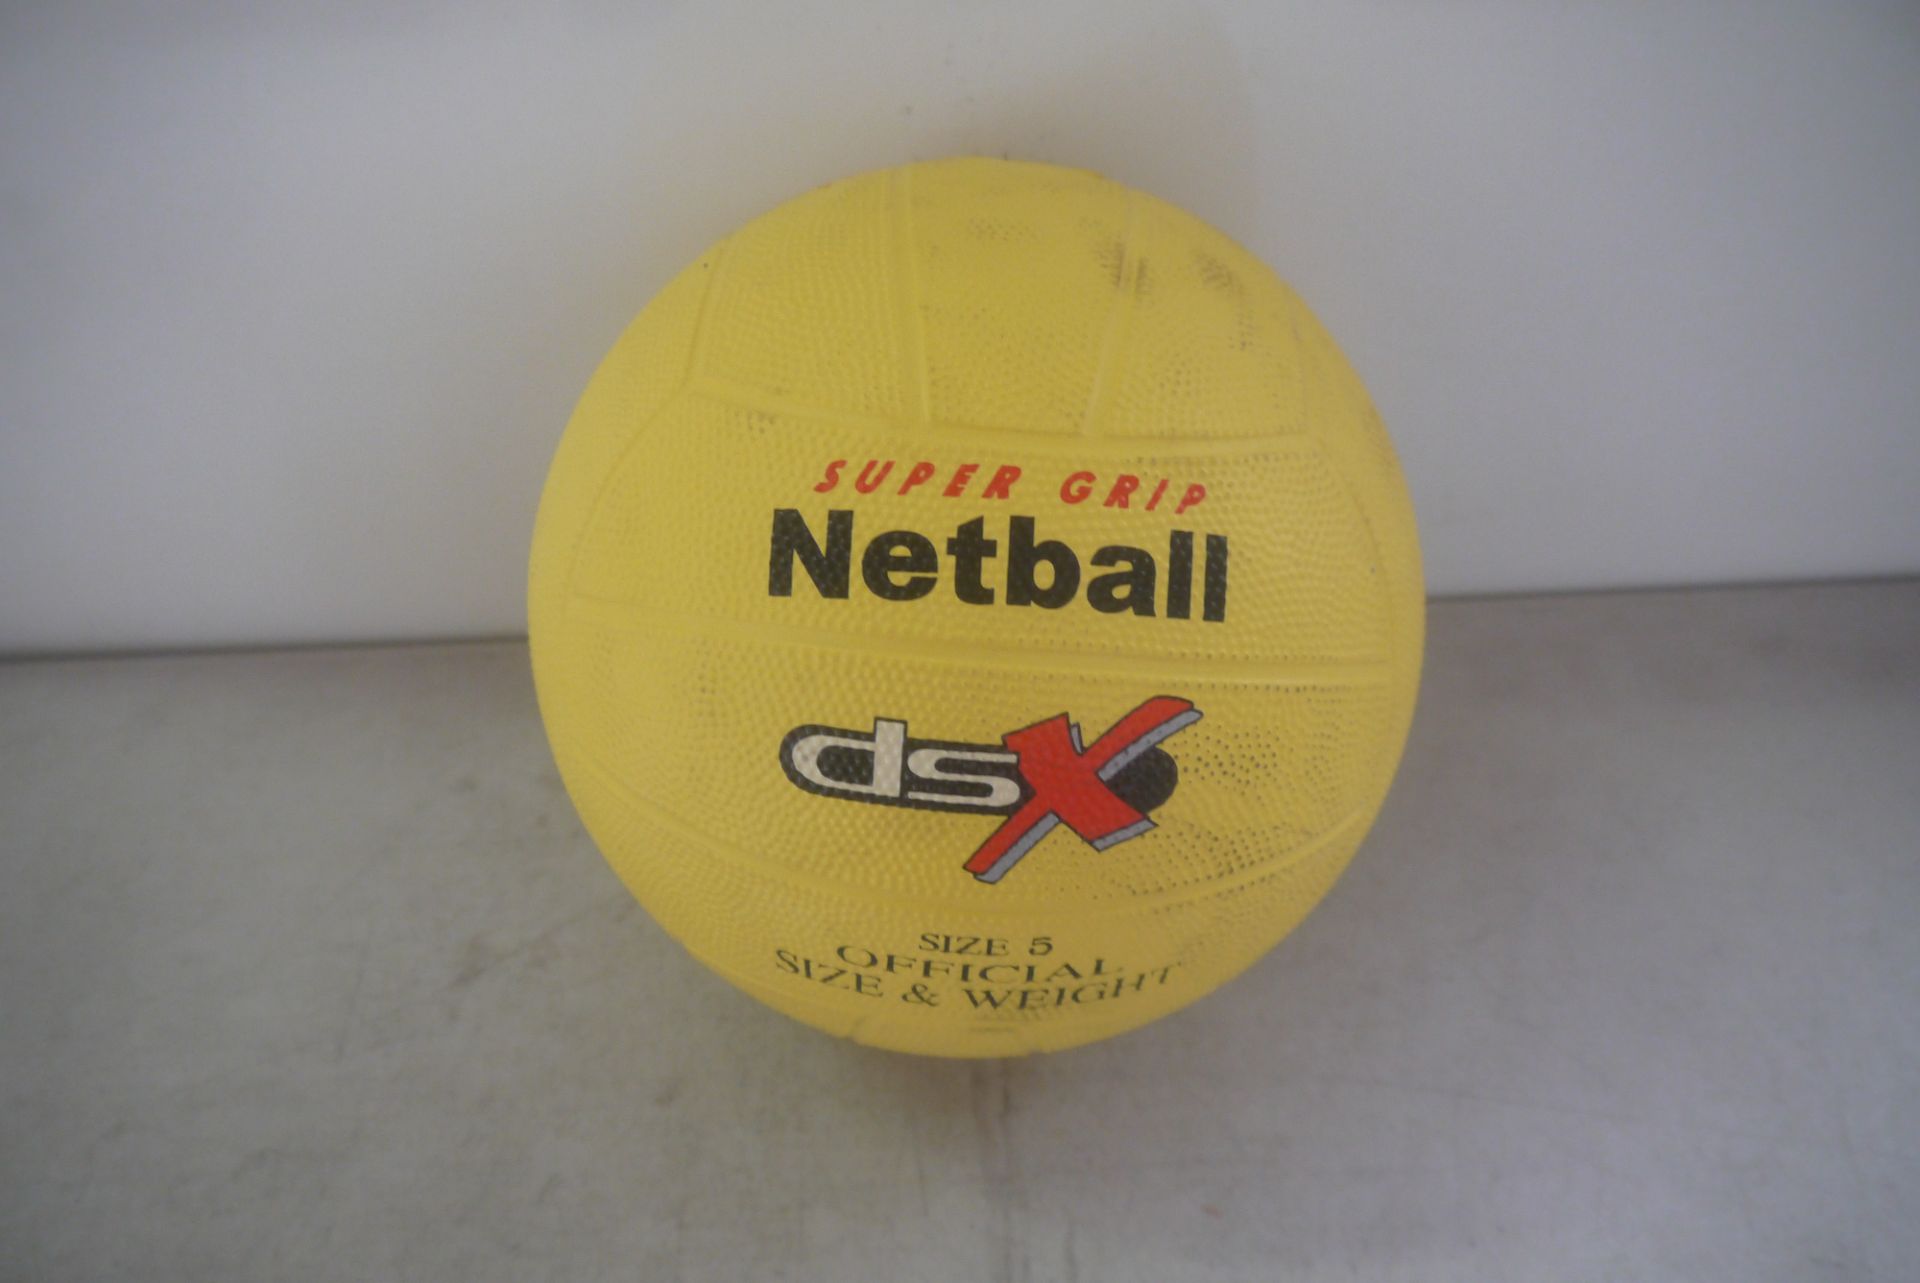 5x DSX super grip netball size 5, new. Total RRP £19.95